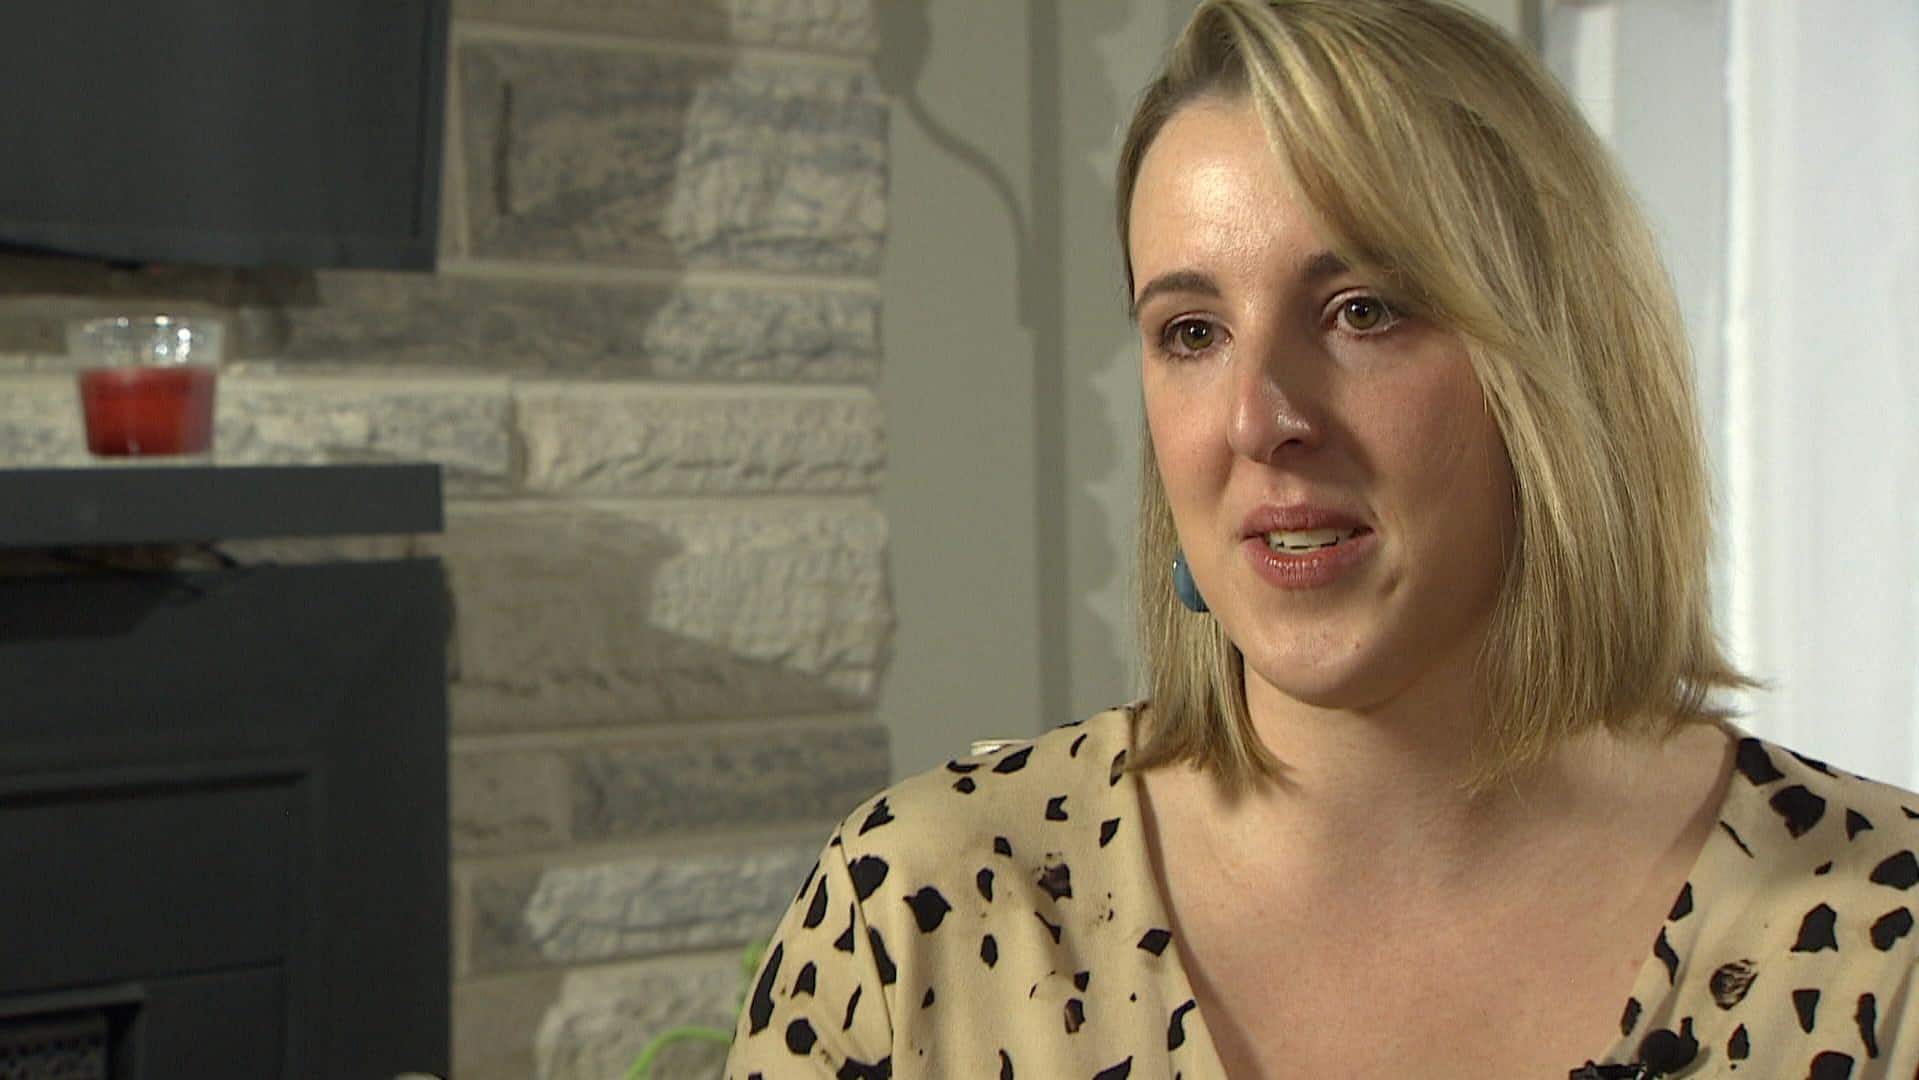 'I felt very worthless': 3 P.E.I. women share their experiences dealing with police after alleged druggings